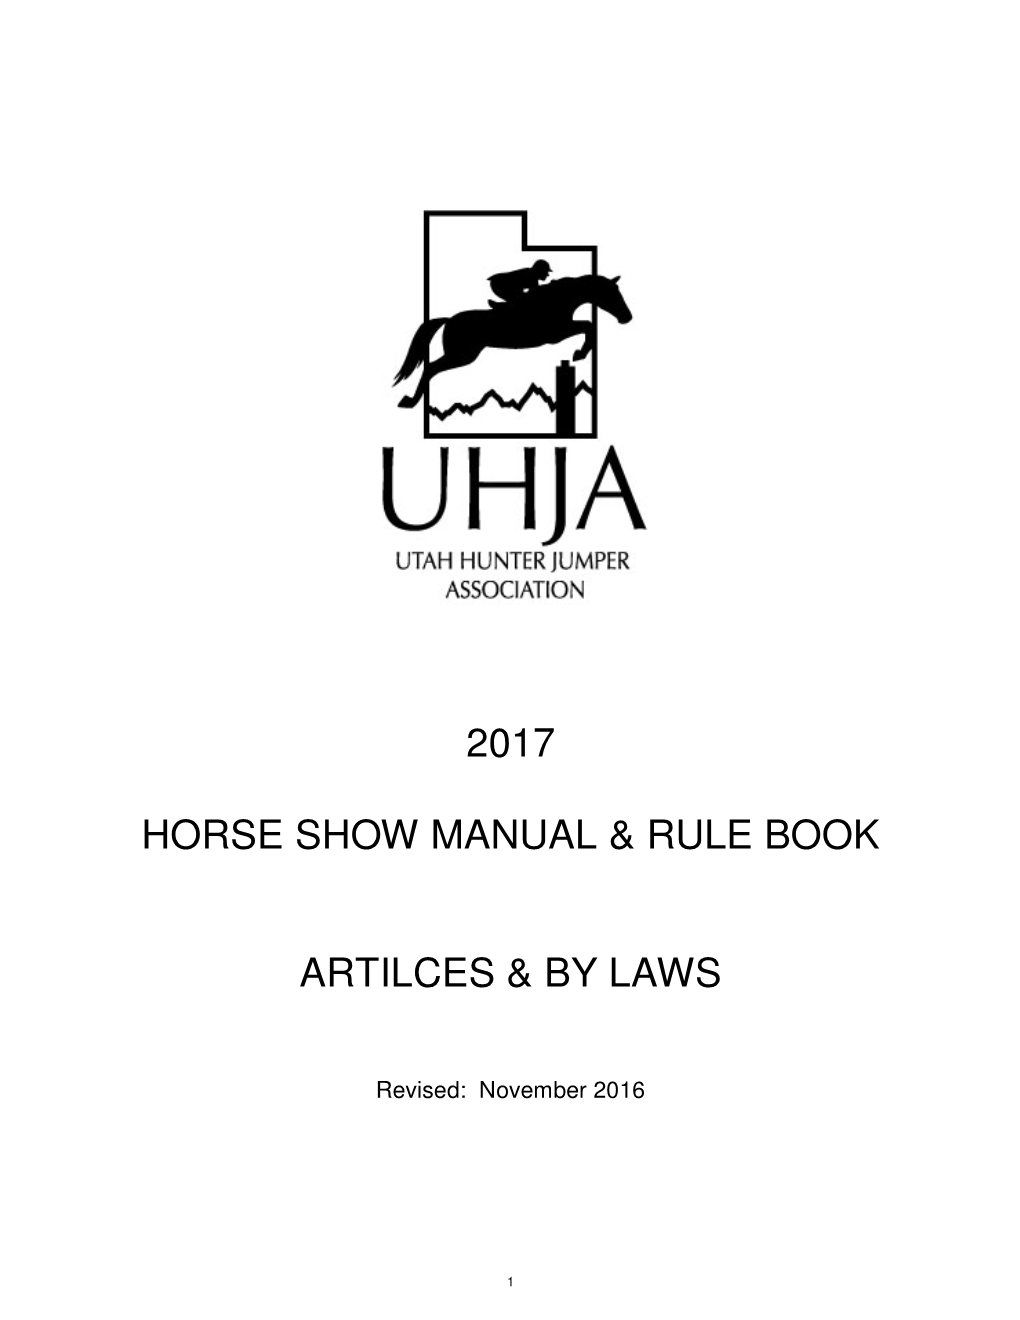 2017 Horse Show Manual & Rule Book Artilces & by Laws